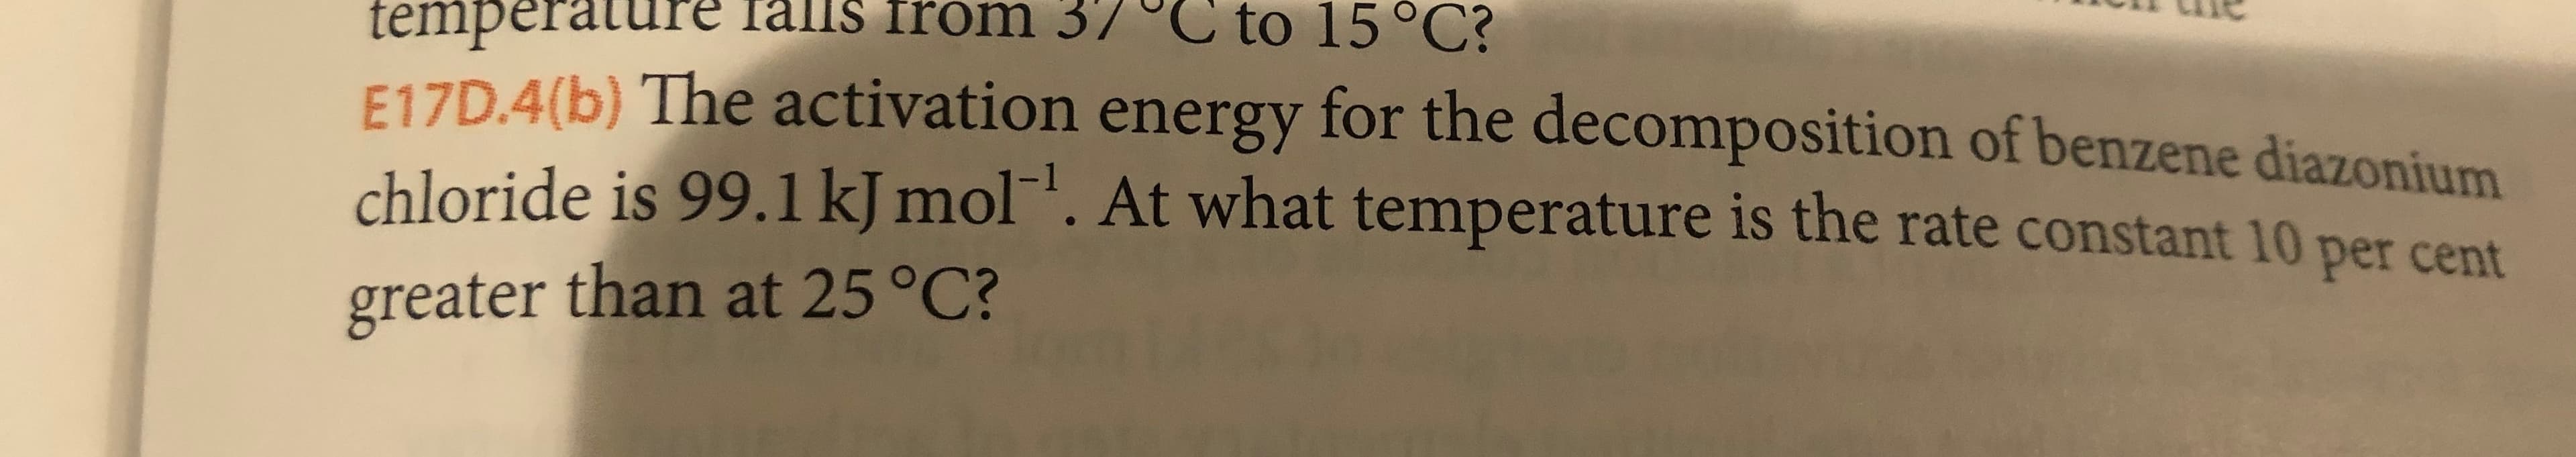 temperature Talls from 37 °C to 15°C?
F17D.4(b) The activation energy for the decomposition of benzene diazonium
chloride is 99.1 kJ mol1. At what temperature is the rate constant 10 per cent
greater than at 25 °C?
